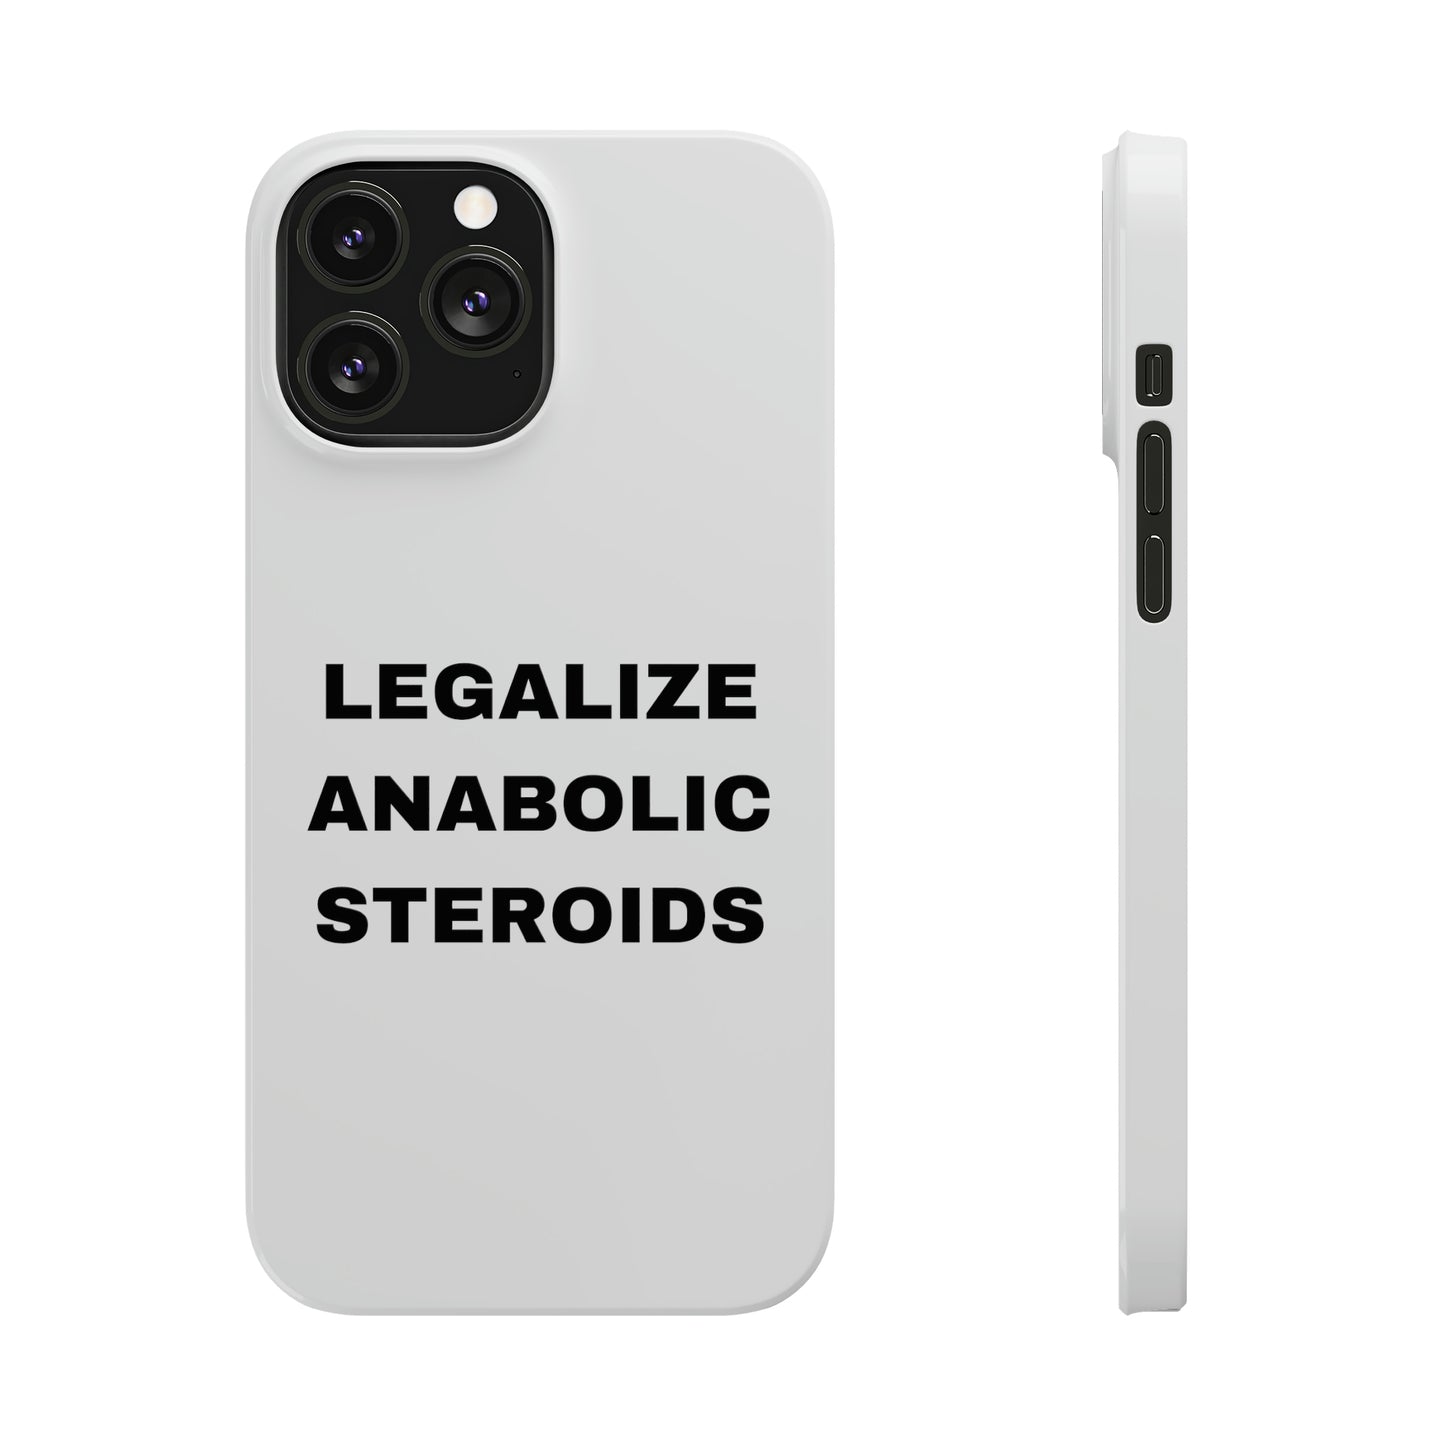 LEGALIZE ANABOLIC STEROIDS iPhone Case